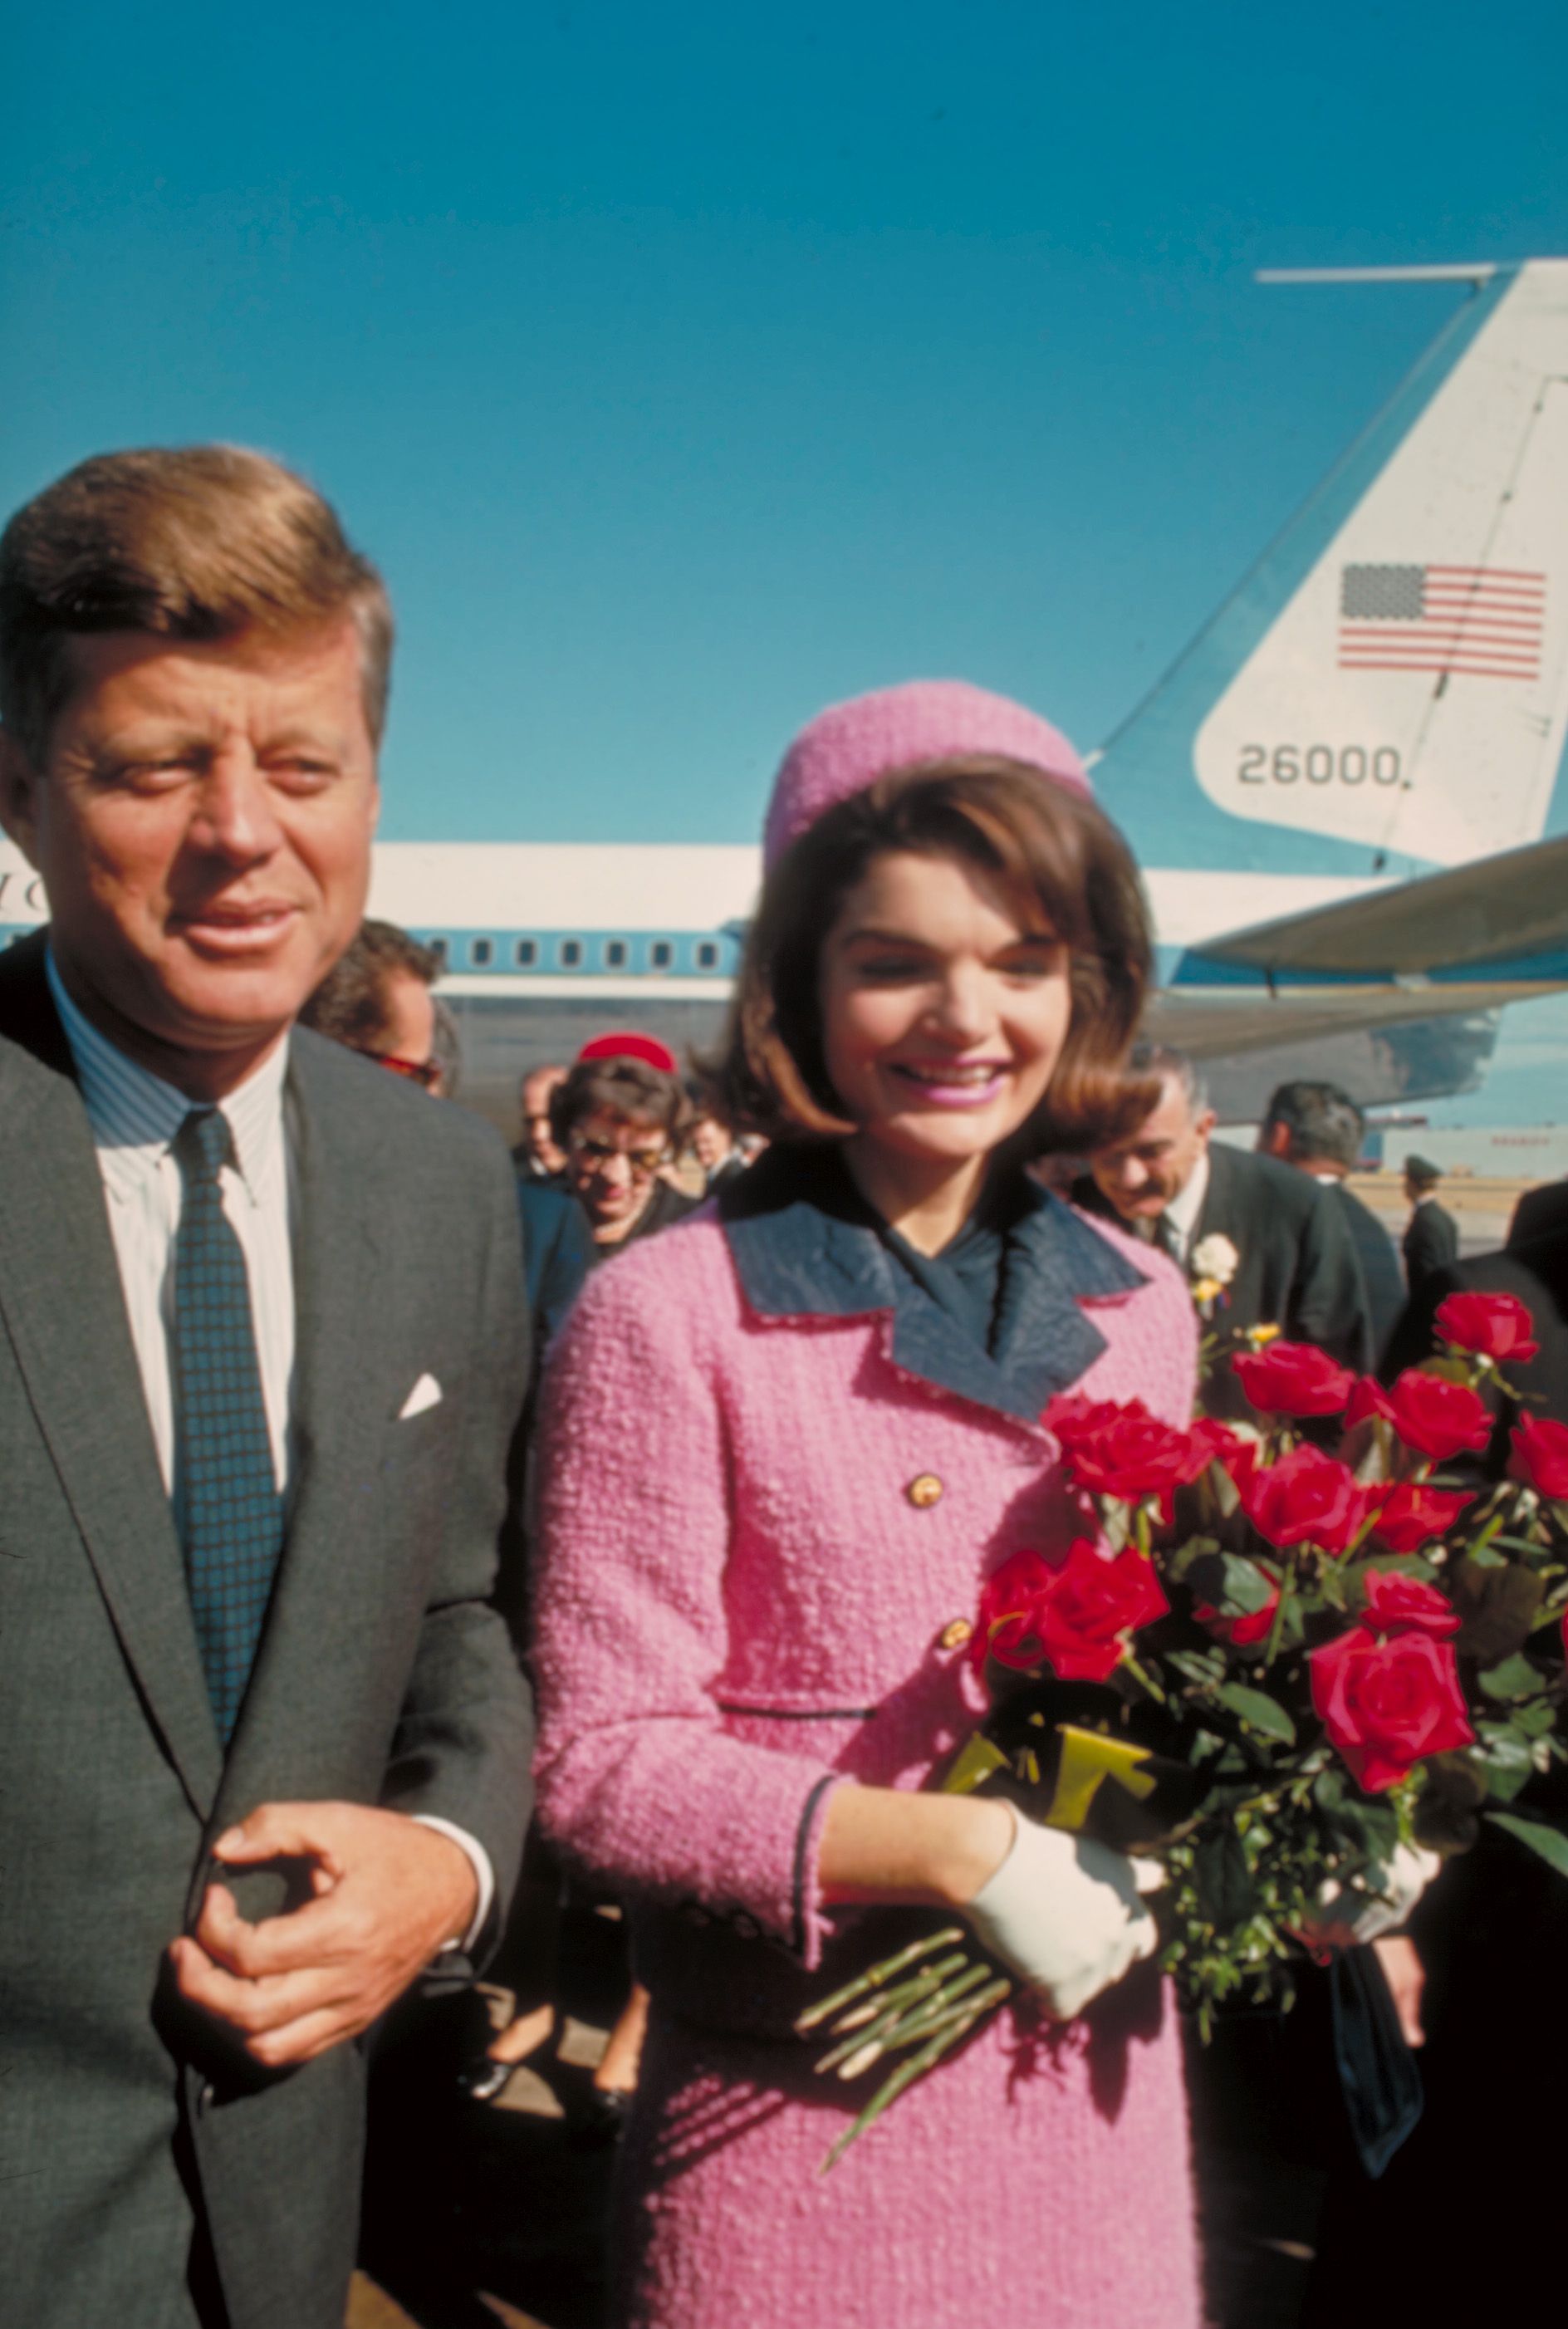 Ynkelig Bemyndige loyalitet Why You Won't See Jackie Kennedy's Iconic Pink Suit in This Lifetime